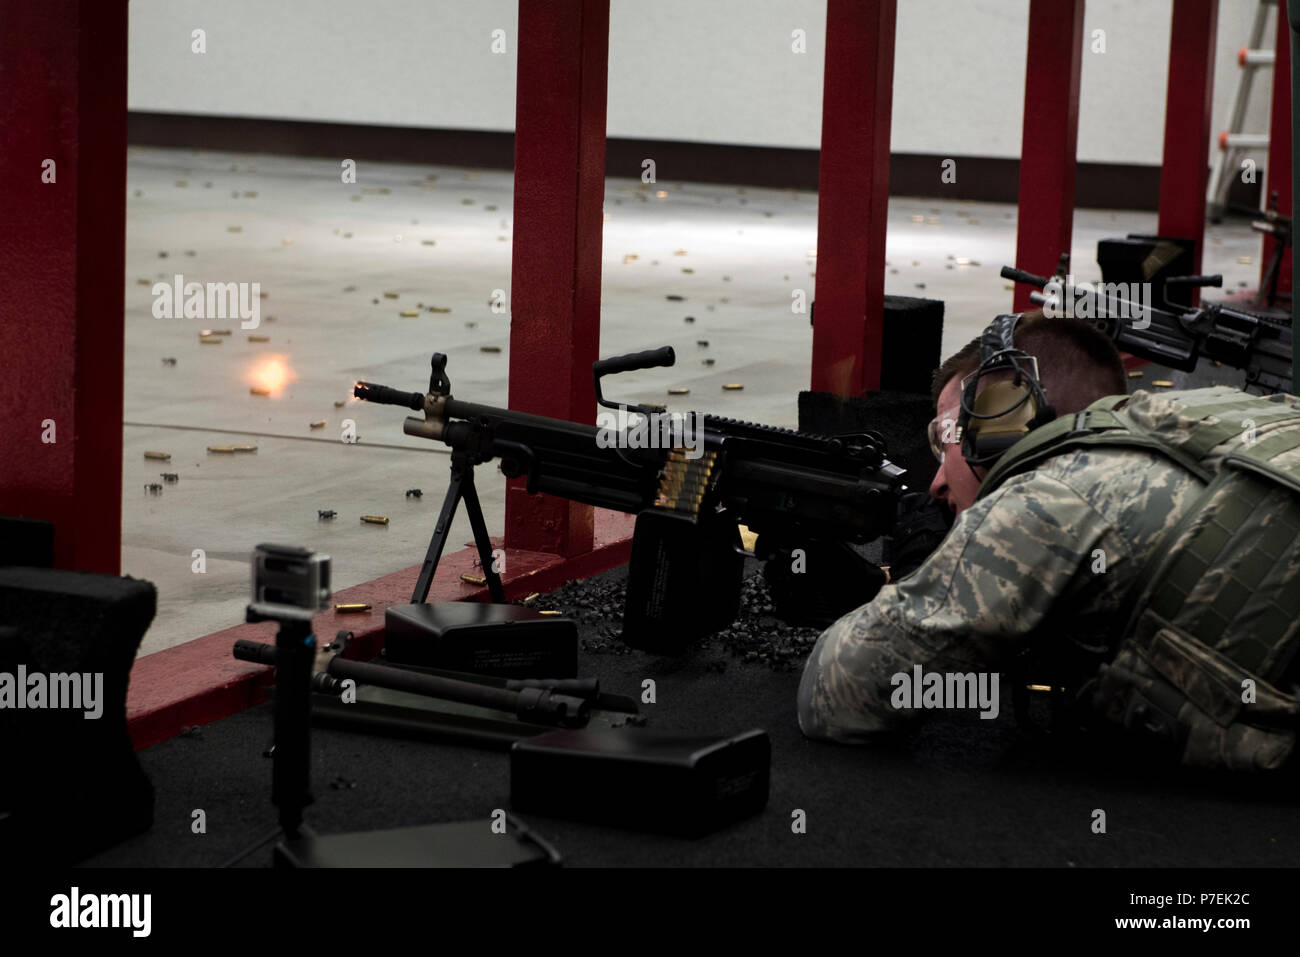 Staff Sgt. Daniel Lanata, 374th Security Forces Squadron 2018 Security Forces Advanced Combat Skills Assessment team member, fires the M249 light machine gun during training, May 31, 2018, at Yokota Air Base, Japan. The 374 SFS team practiced firing the various weapons including the M4 carbine assault rifle, M9 pistol and the M249 light machine gun in preparation for the 2018 ACSA competition at Andersen Air Force Base, Guam. (U.S. Air Force photo by Senior Airman Donald Hudson) Stock Photo